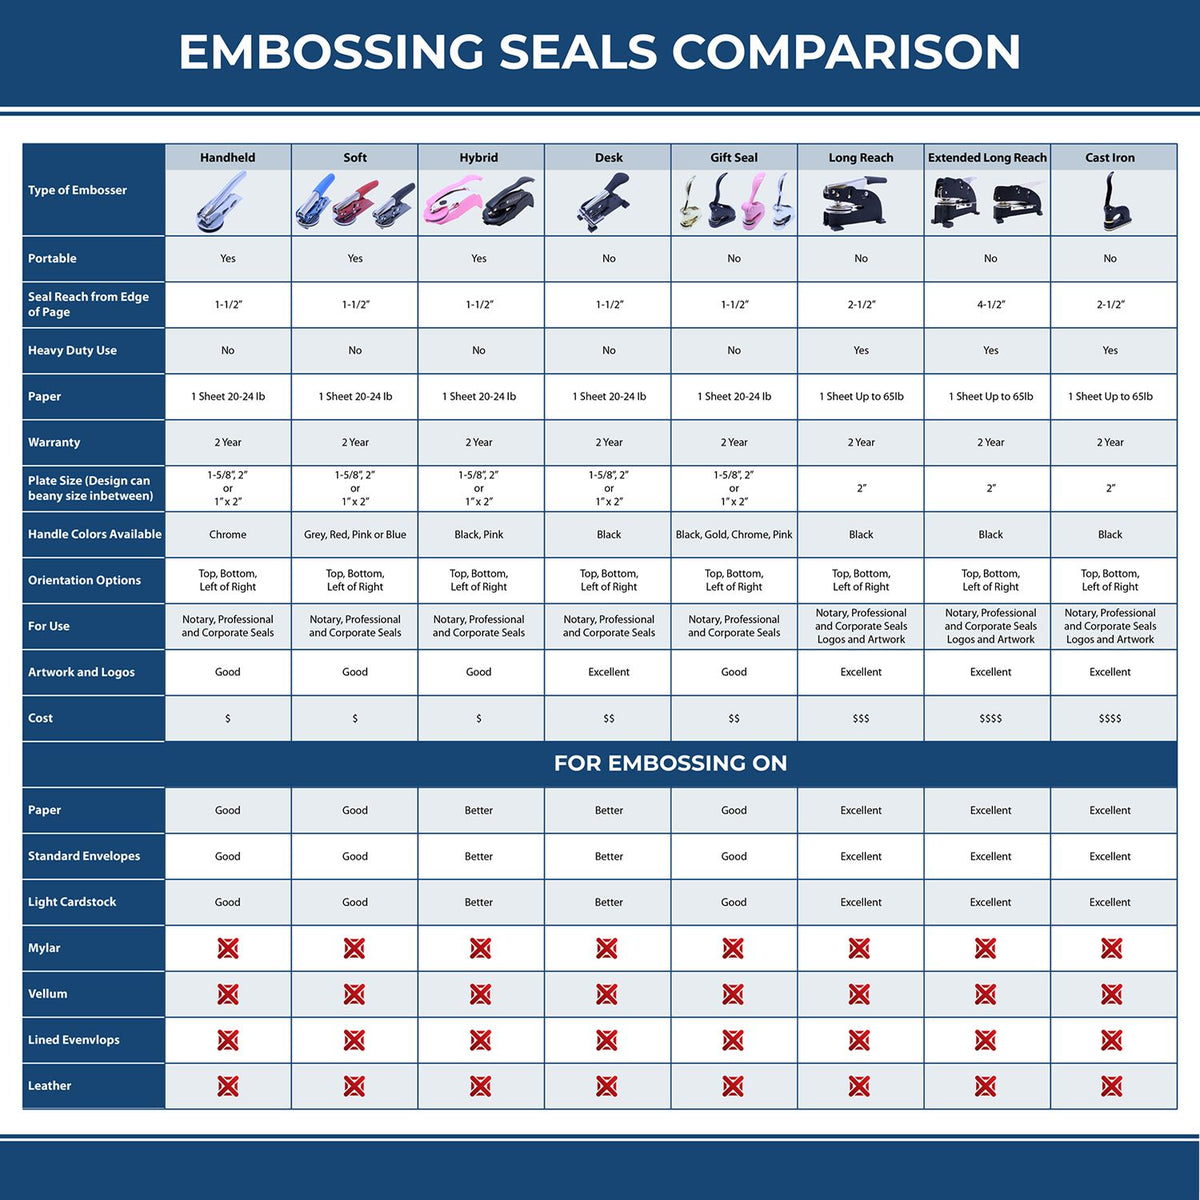 A comparison chart for the different types of mount models available for the Hybrid Oregon Geologist Seal